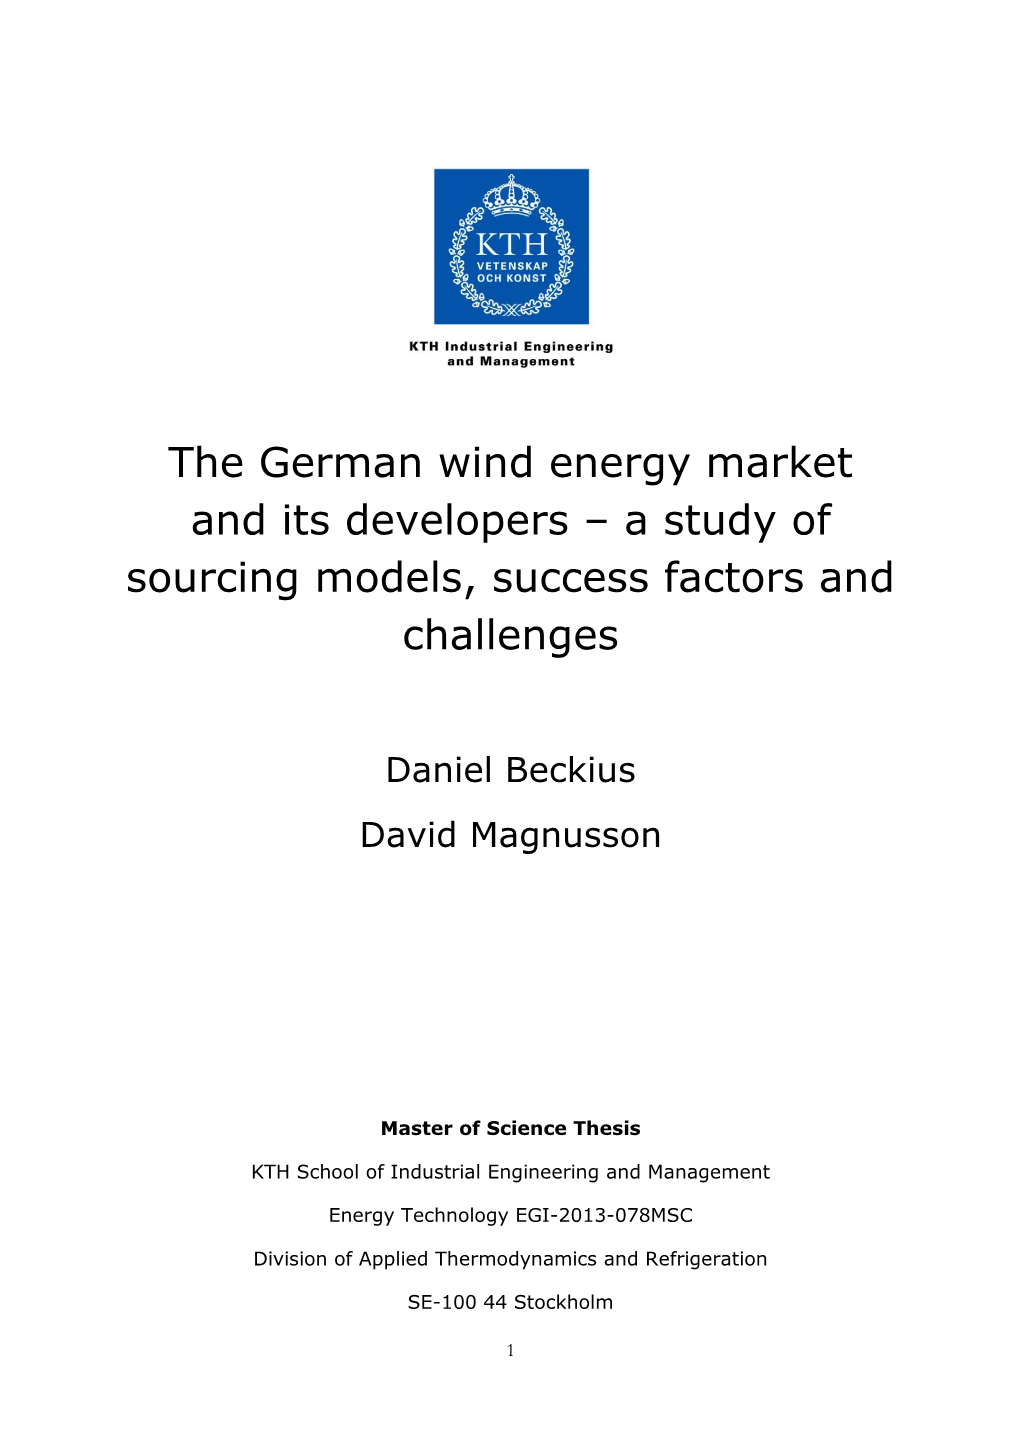 The German Wind Energy Market and Its Developers – a Study of Sourcing Models, Success Factors and Challenges